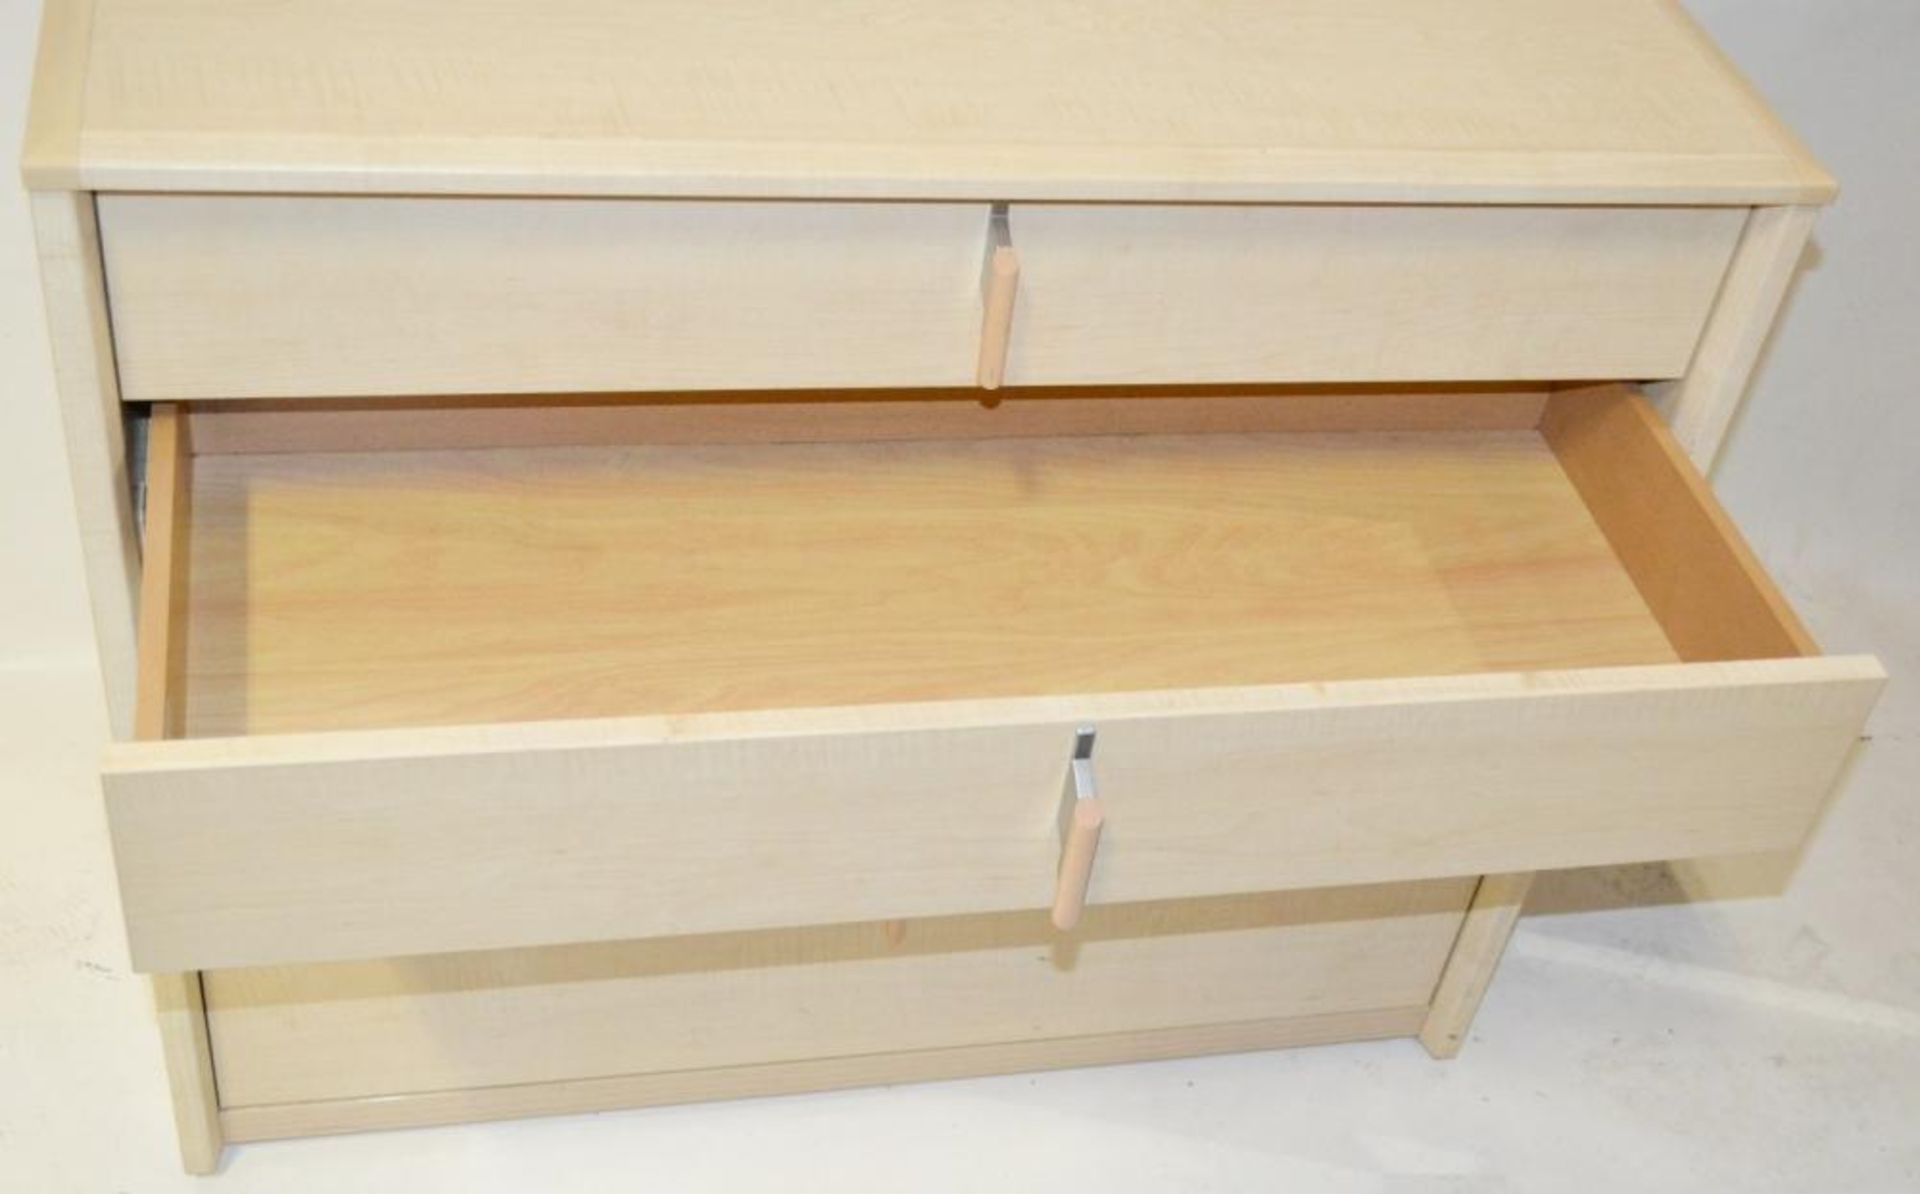 1 x GAUTIER Chest Of Drawers With A Natural Oak Finish - Dimensions: W94 x D45 x H79.5cm - CL268 - R - Image 4 of 5